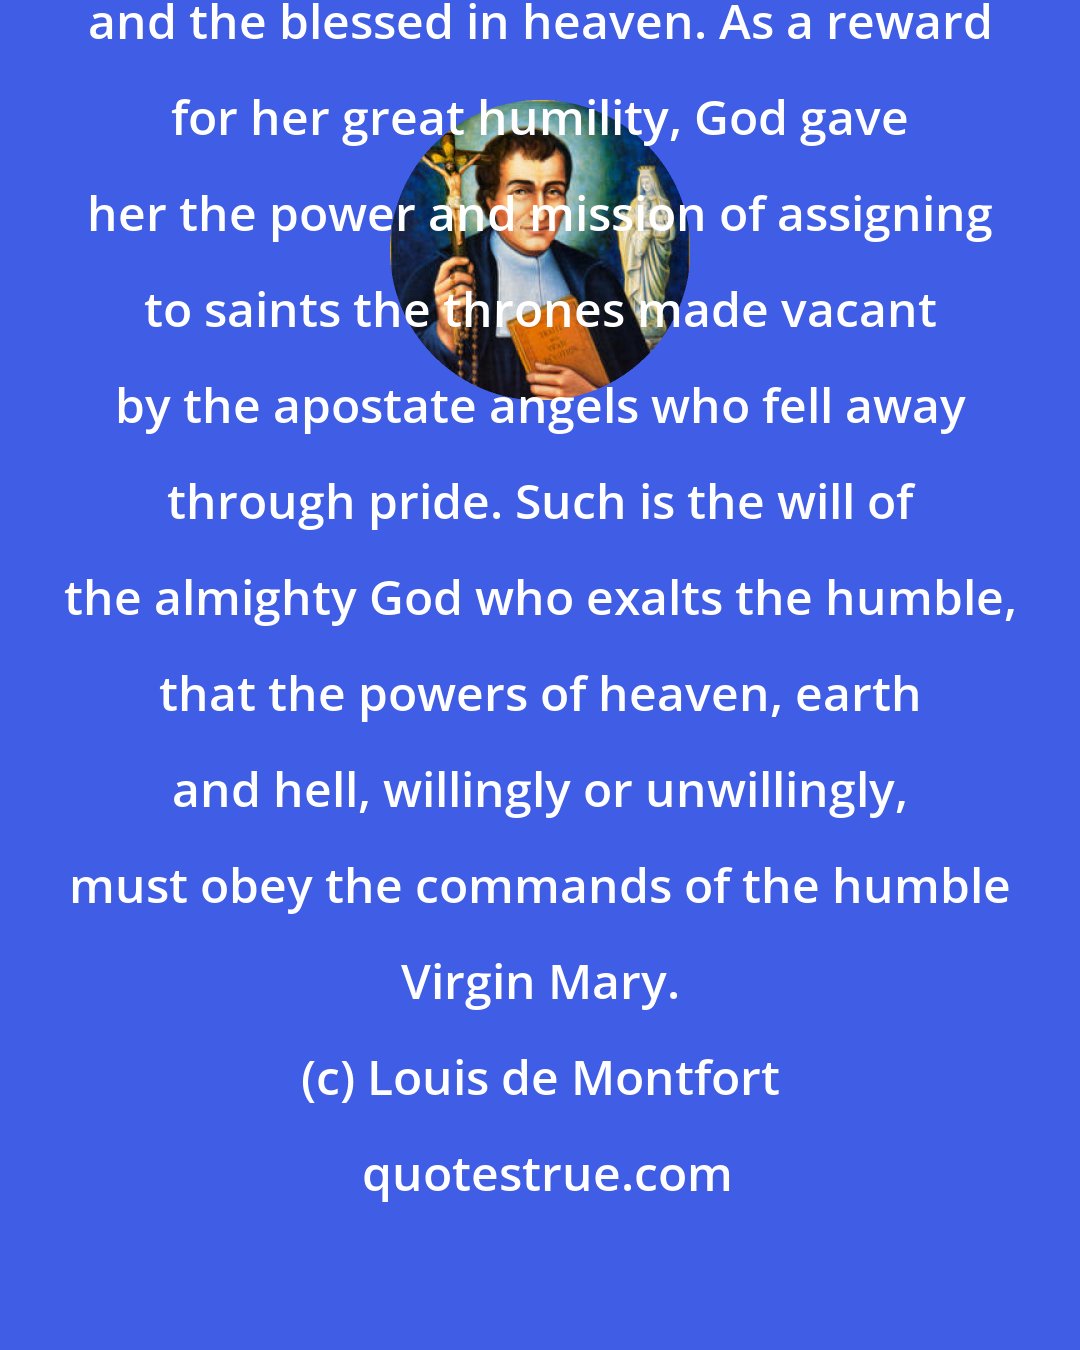 Louis de Montfort: Mary has the authority over the angels and the blessed in heaven. As a reward for her great humility, God gave her the power and mission of assigning to saints the thrones made vacant by the apostate angels who fell away through pride. Such is the will of the almighty God who exalts the humble, that the powers of heaven, earth and hell, willingly or unwillingly, must obey the commands of the humble Virgin Mary.